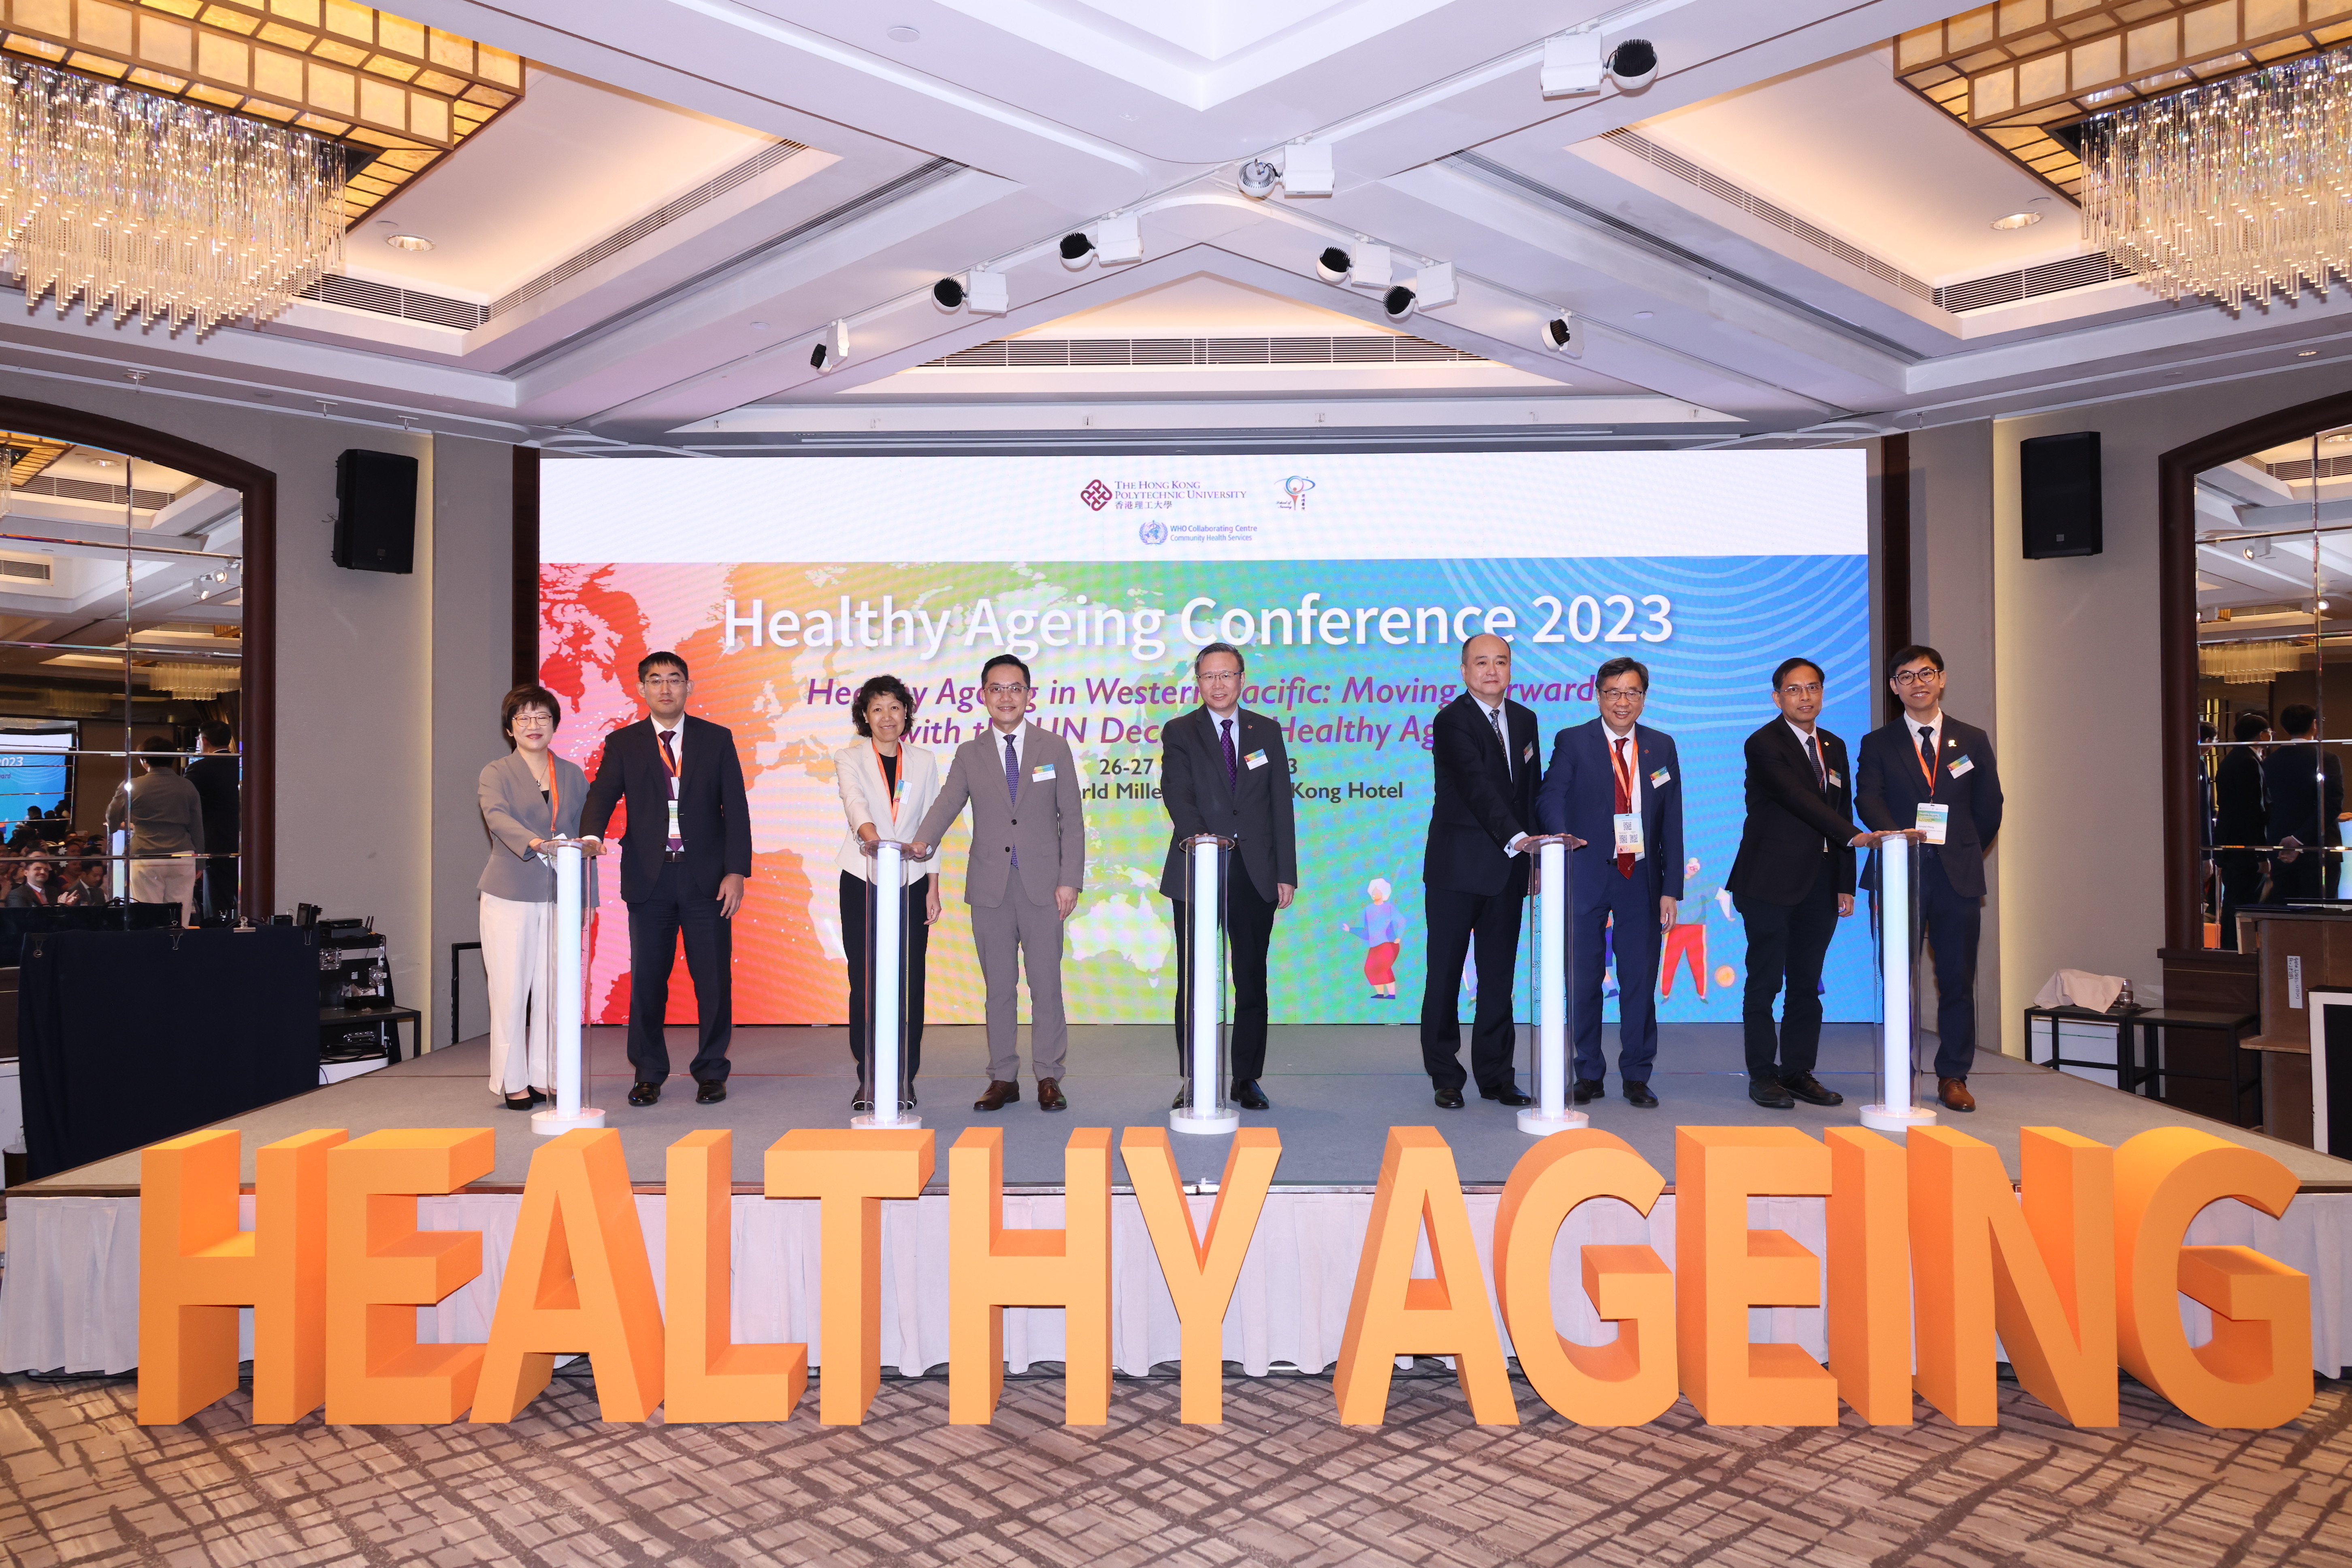 The distinguished guests at the Healthy Ageing Conference 2023 presided over the inaugural ceremony, symbolizing the collective commitment of conference participants to promote healthy ageing in the Western Pacific region in alignment with the United Nations' Decade of Healthy Ageing (2021–2030).